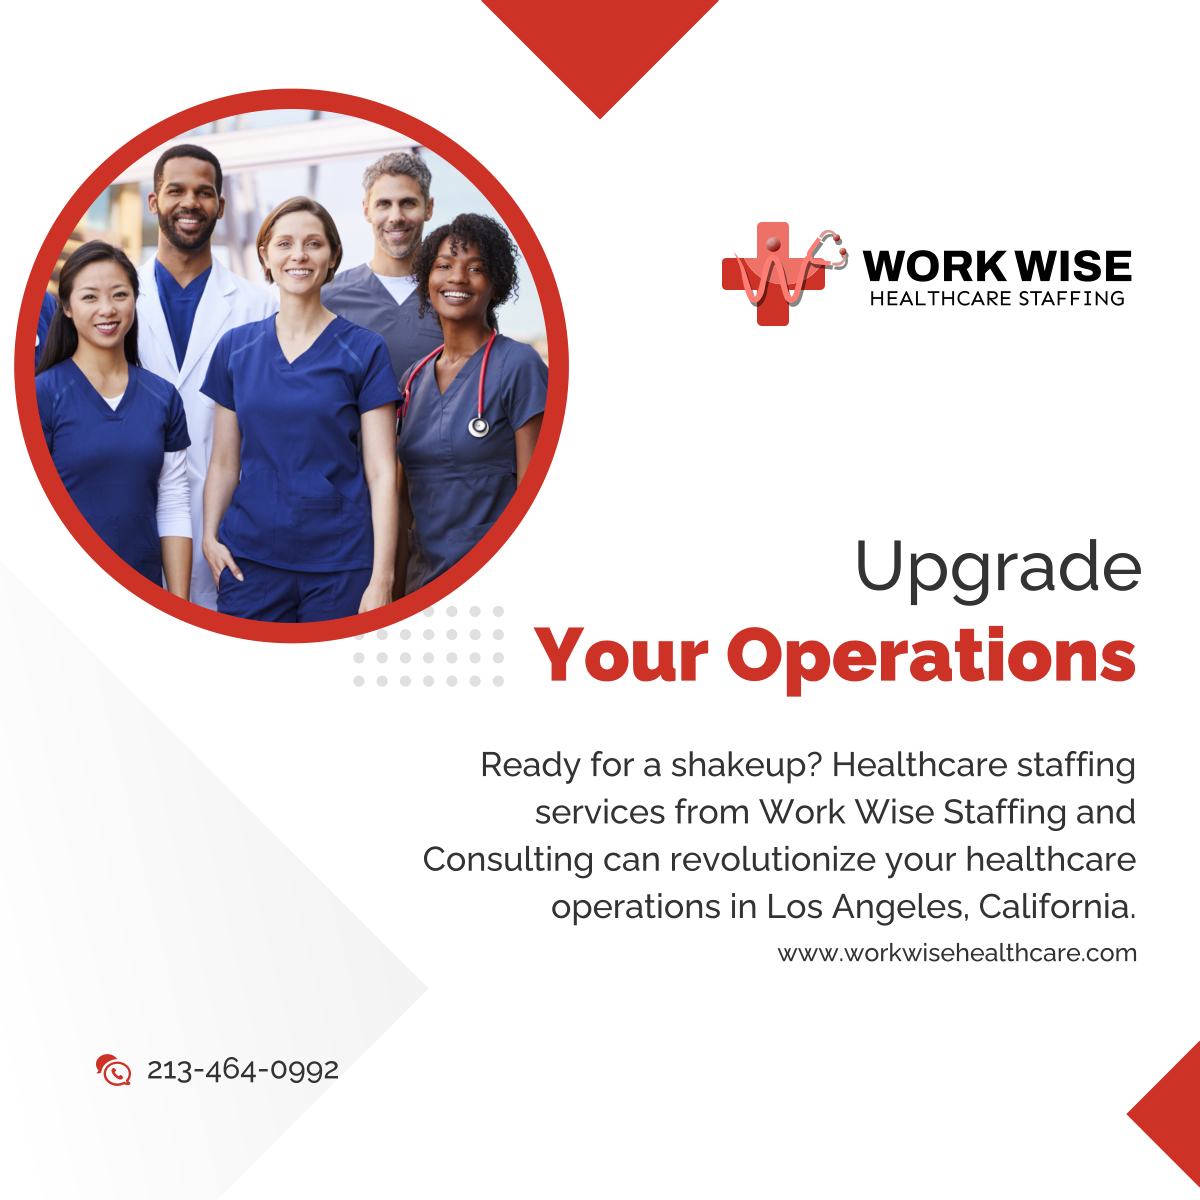 Join us on our mission to provide quality care in every healthcare facility in Los Angeles. Work Wise Staffing and Consulting is your ally in facing staffing challenges head-on. Let's work together for a healthier tomorrow. 

#LosAngelesCalifornia #MedicalStaffing